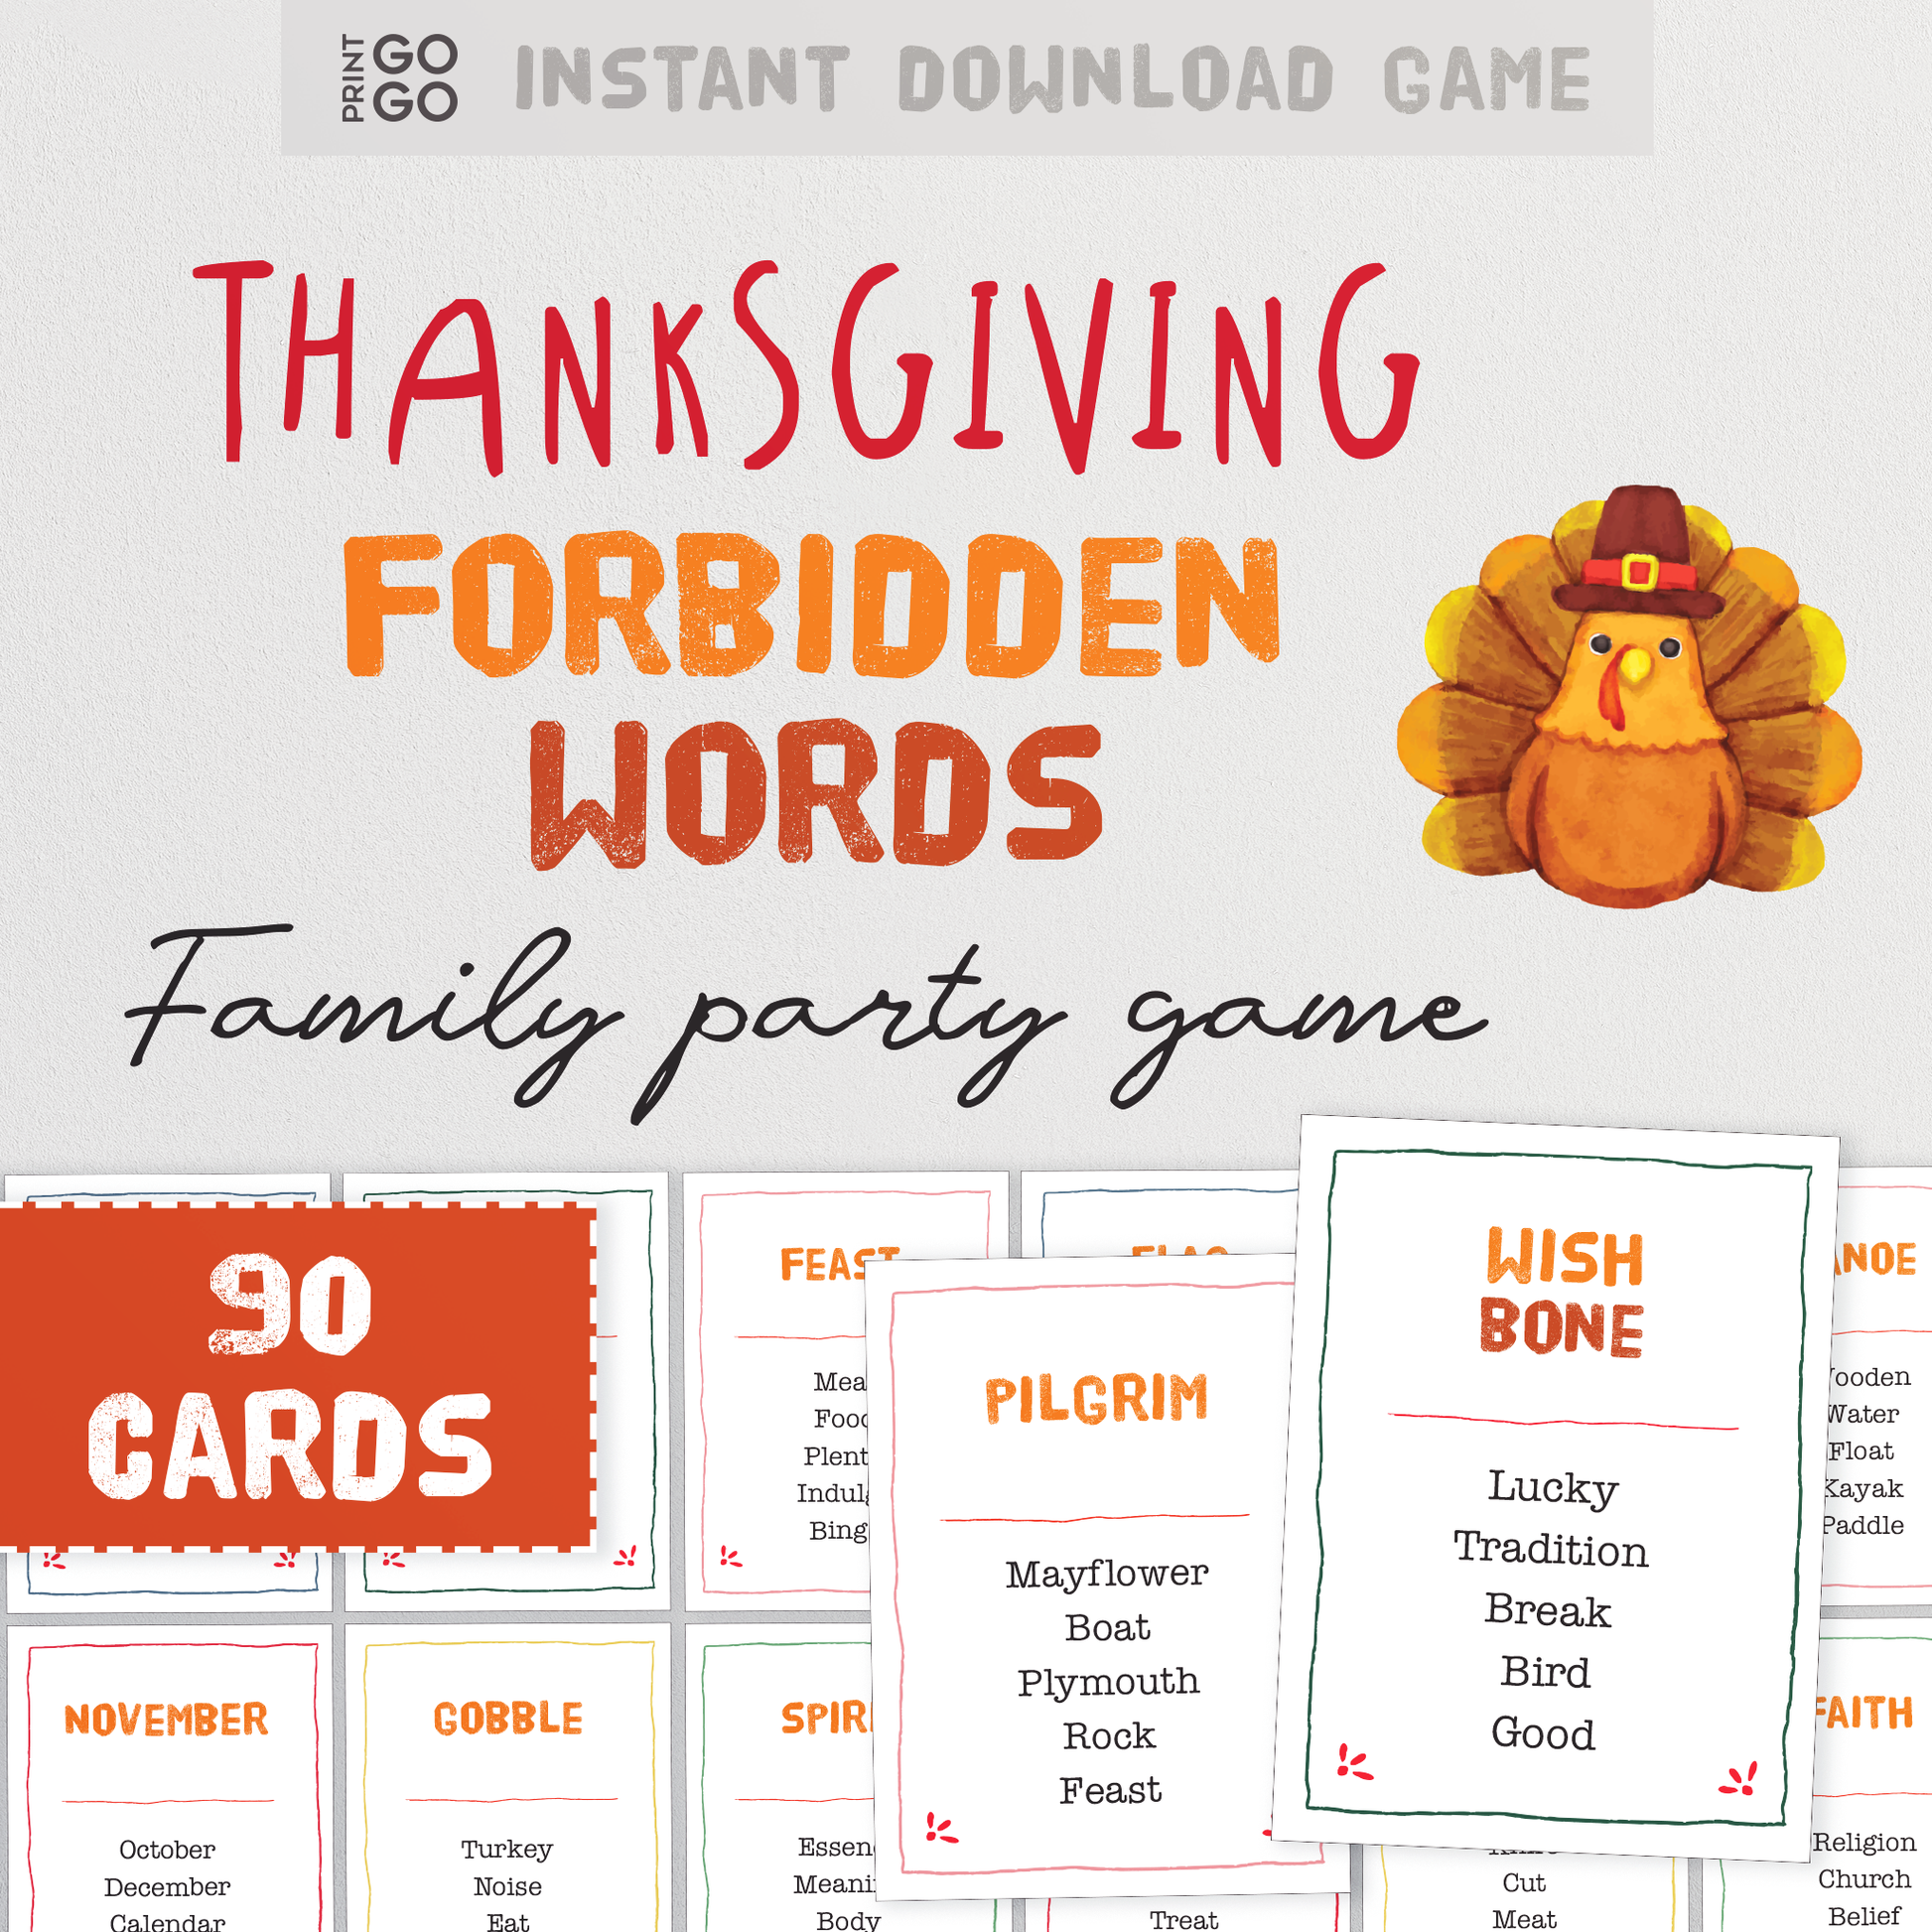 Thanksgiving Forbidden Words - The Fun Quick Thinking Family Party Game